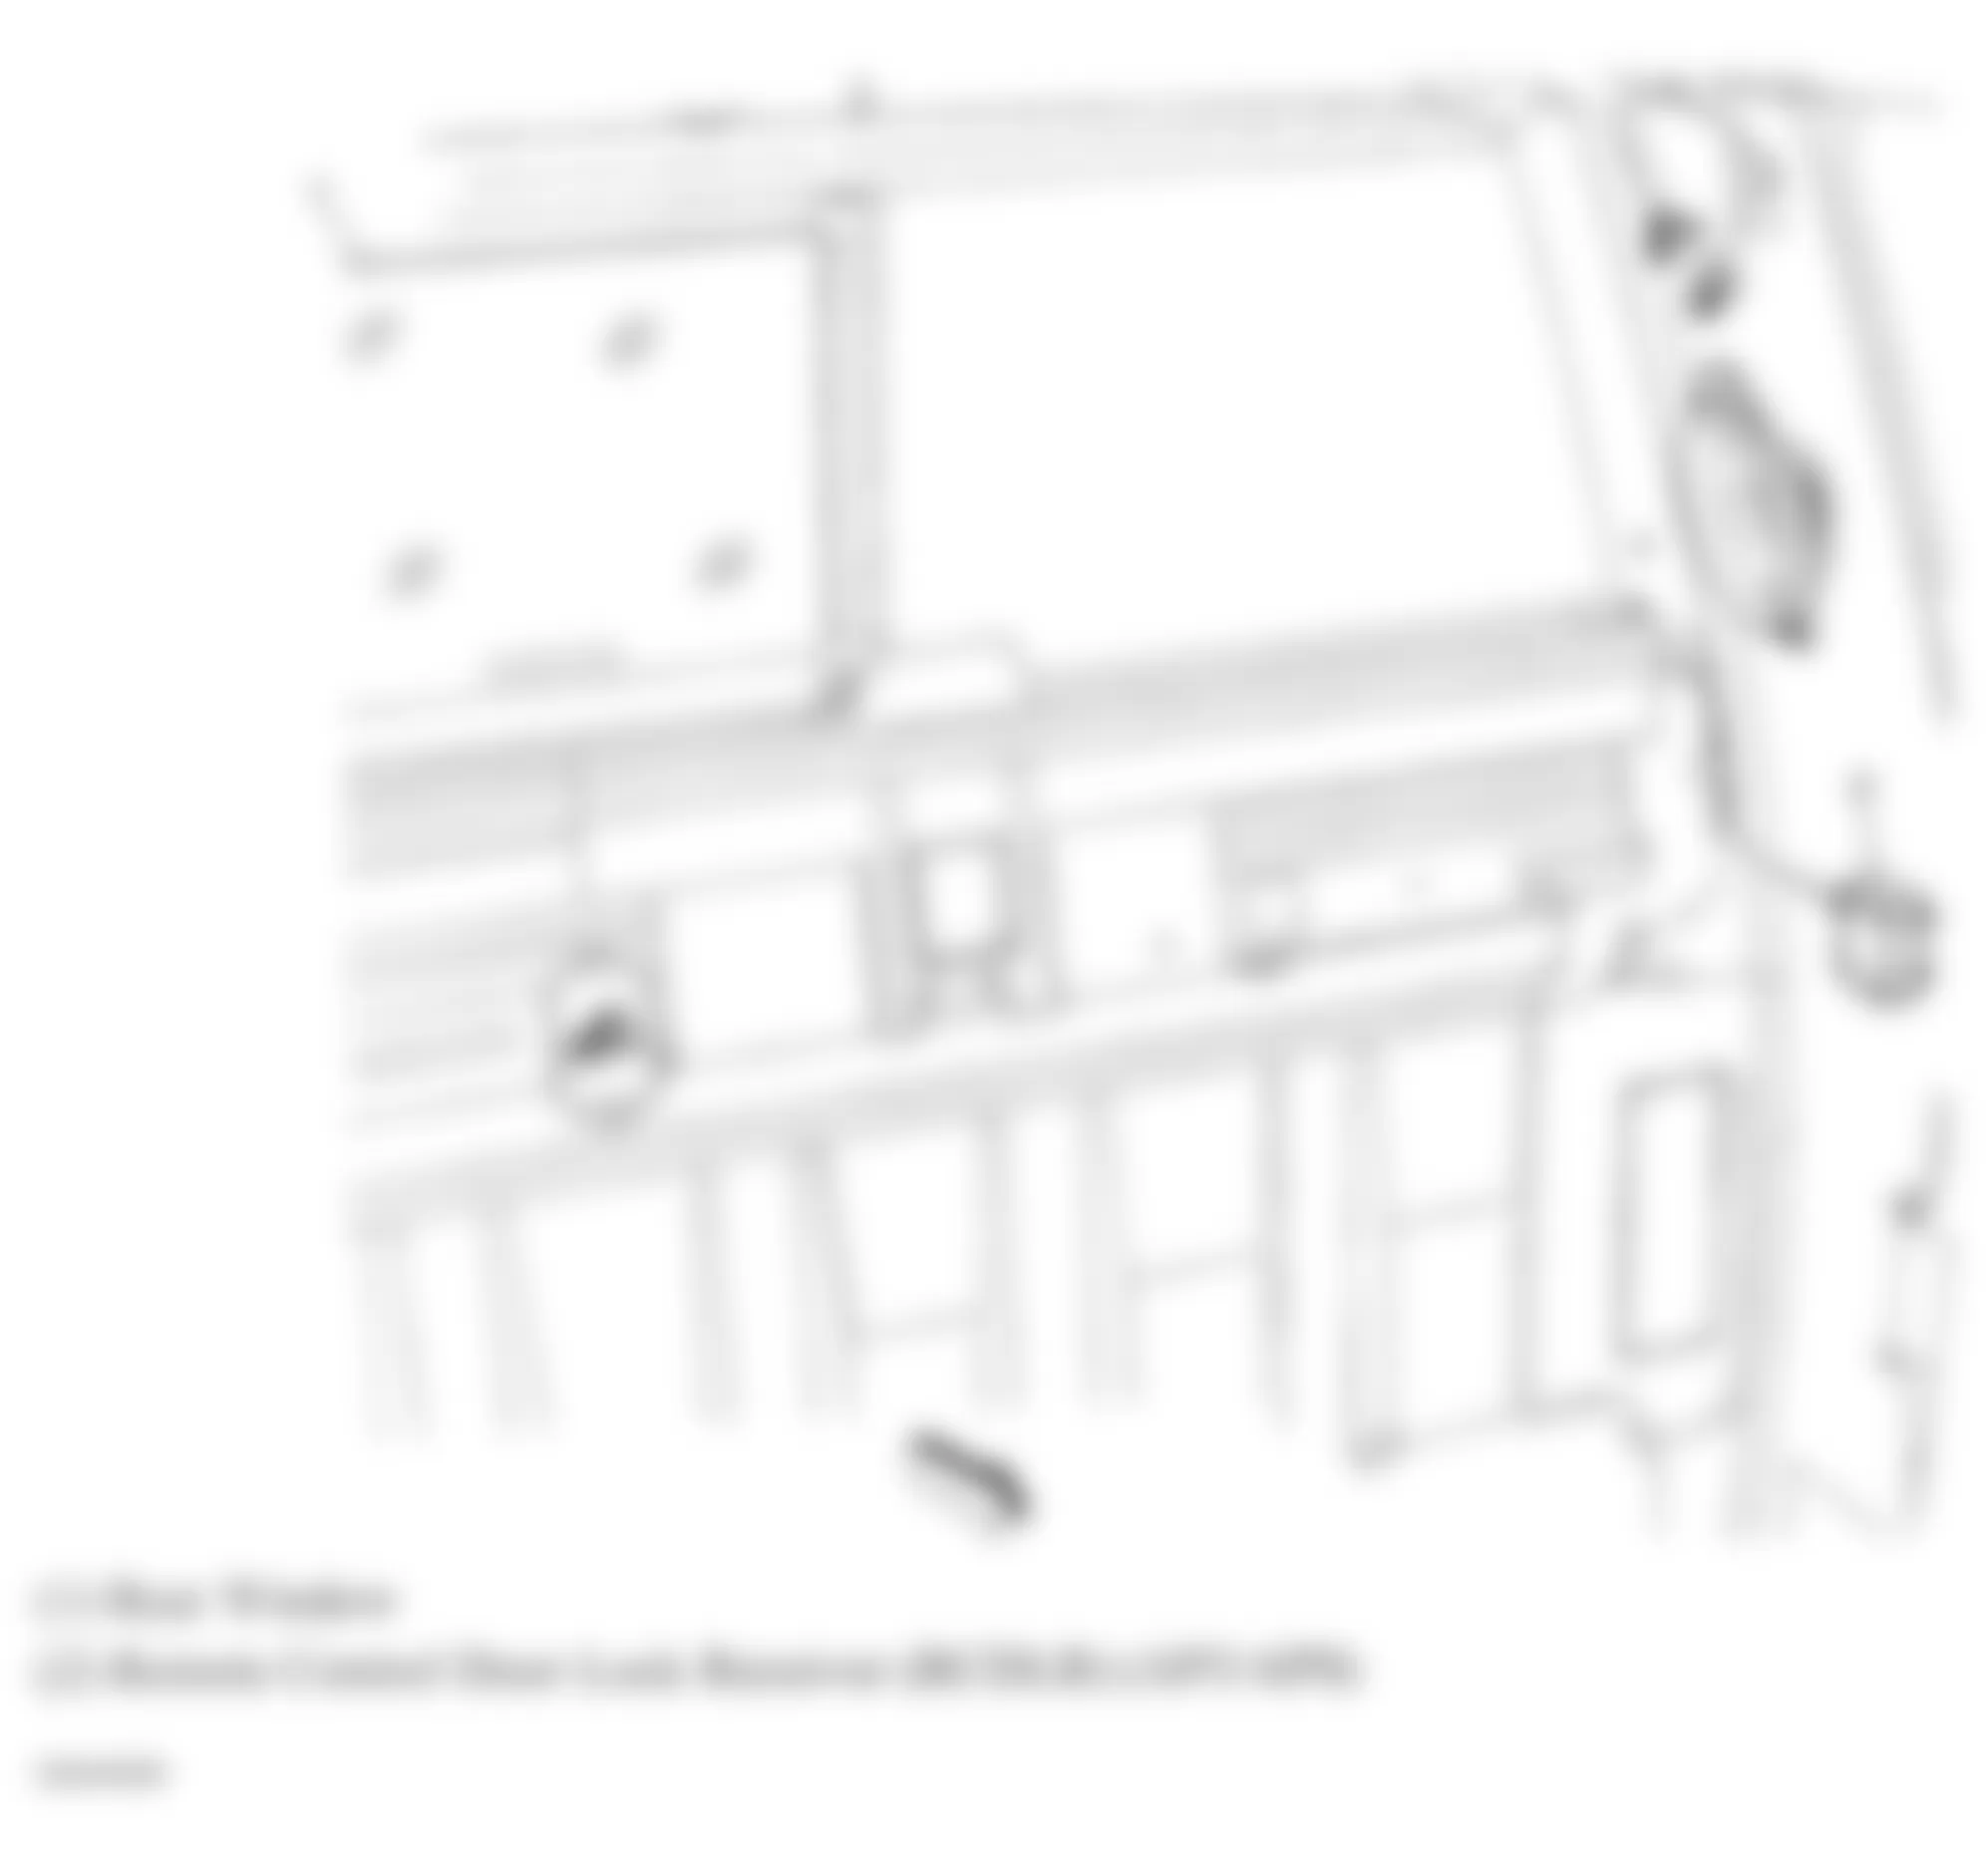 GMC Sierra 1500 2010 - Component Locations -  Left Rear Of Passenger Compartment